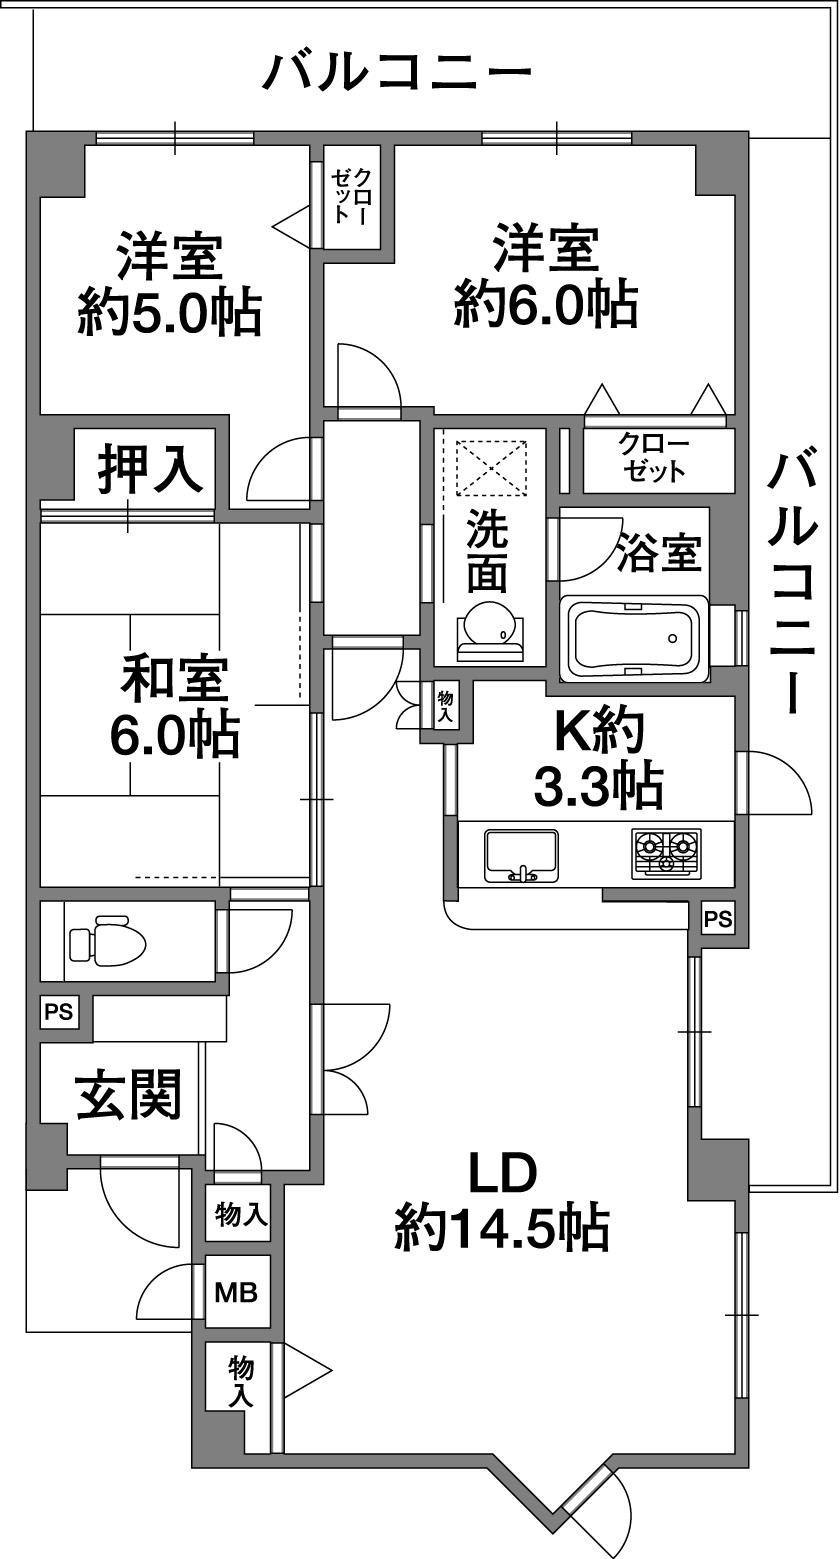 Floor plan. 3LDK, Price 25,800,000 yen, Occupied area 77.27 sq m , We have to ensure privacy of at balcony area 18.84 sq m square room.